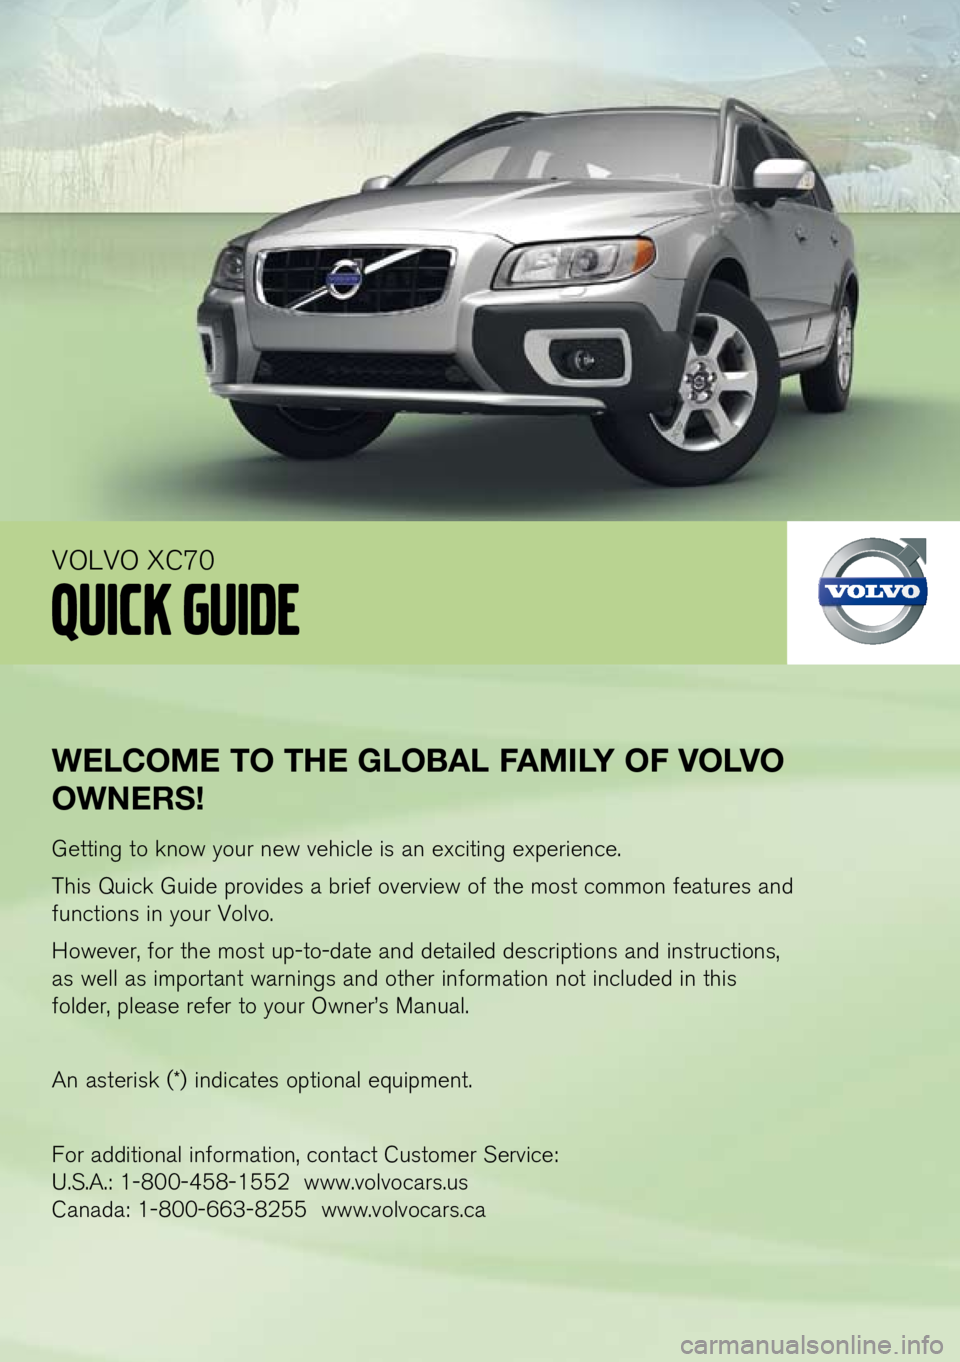 VOLVO XC70 2012  Quick Guide 
WElCOME TO THE G lOBA l FAMI lY OF  vO lv O 
OWNERS!
Getting to know your new vehicle is an exciting experience.
This Quick Guide provides a brief overview of the most common features and 
functions 